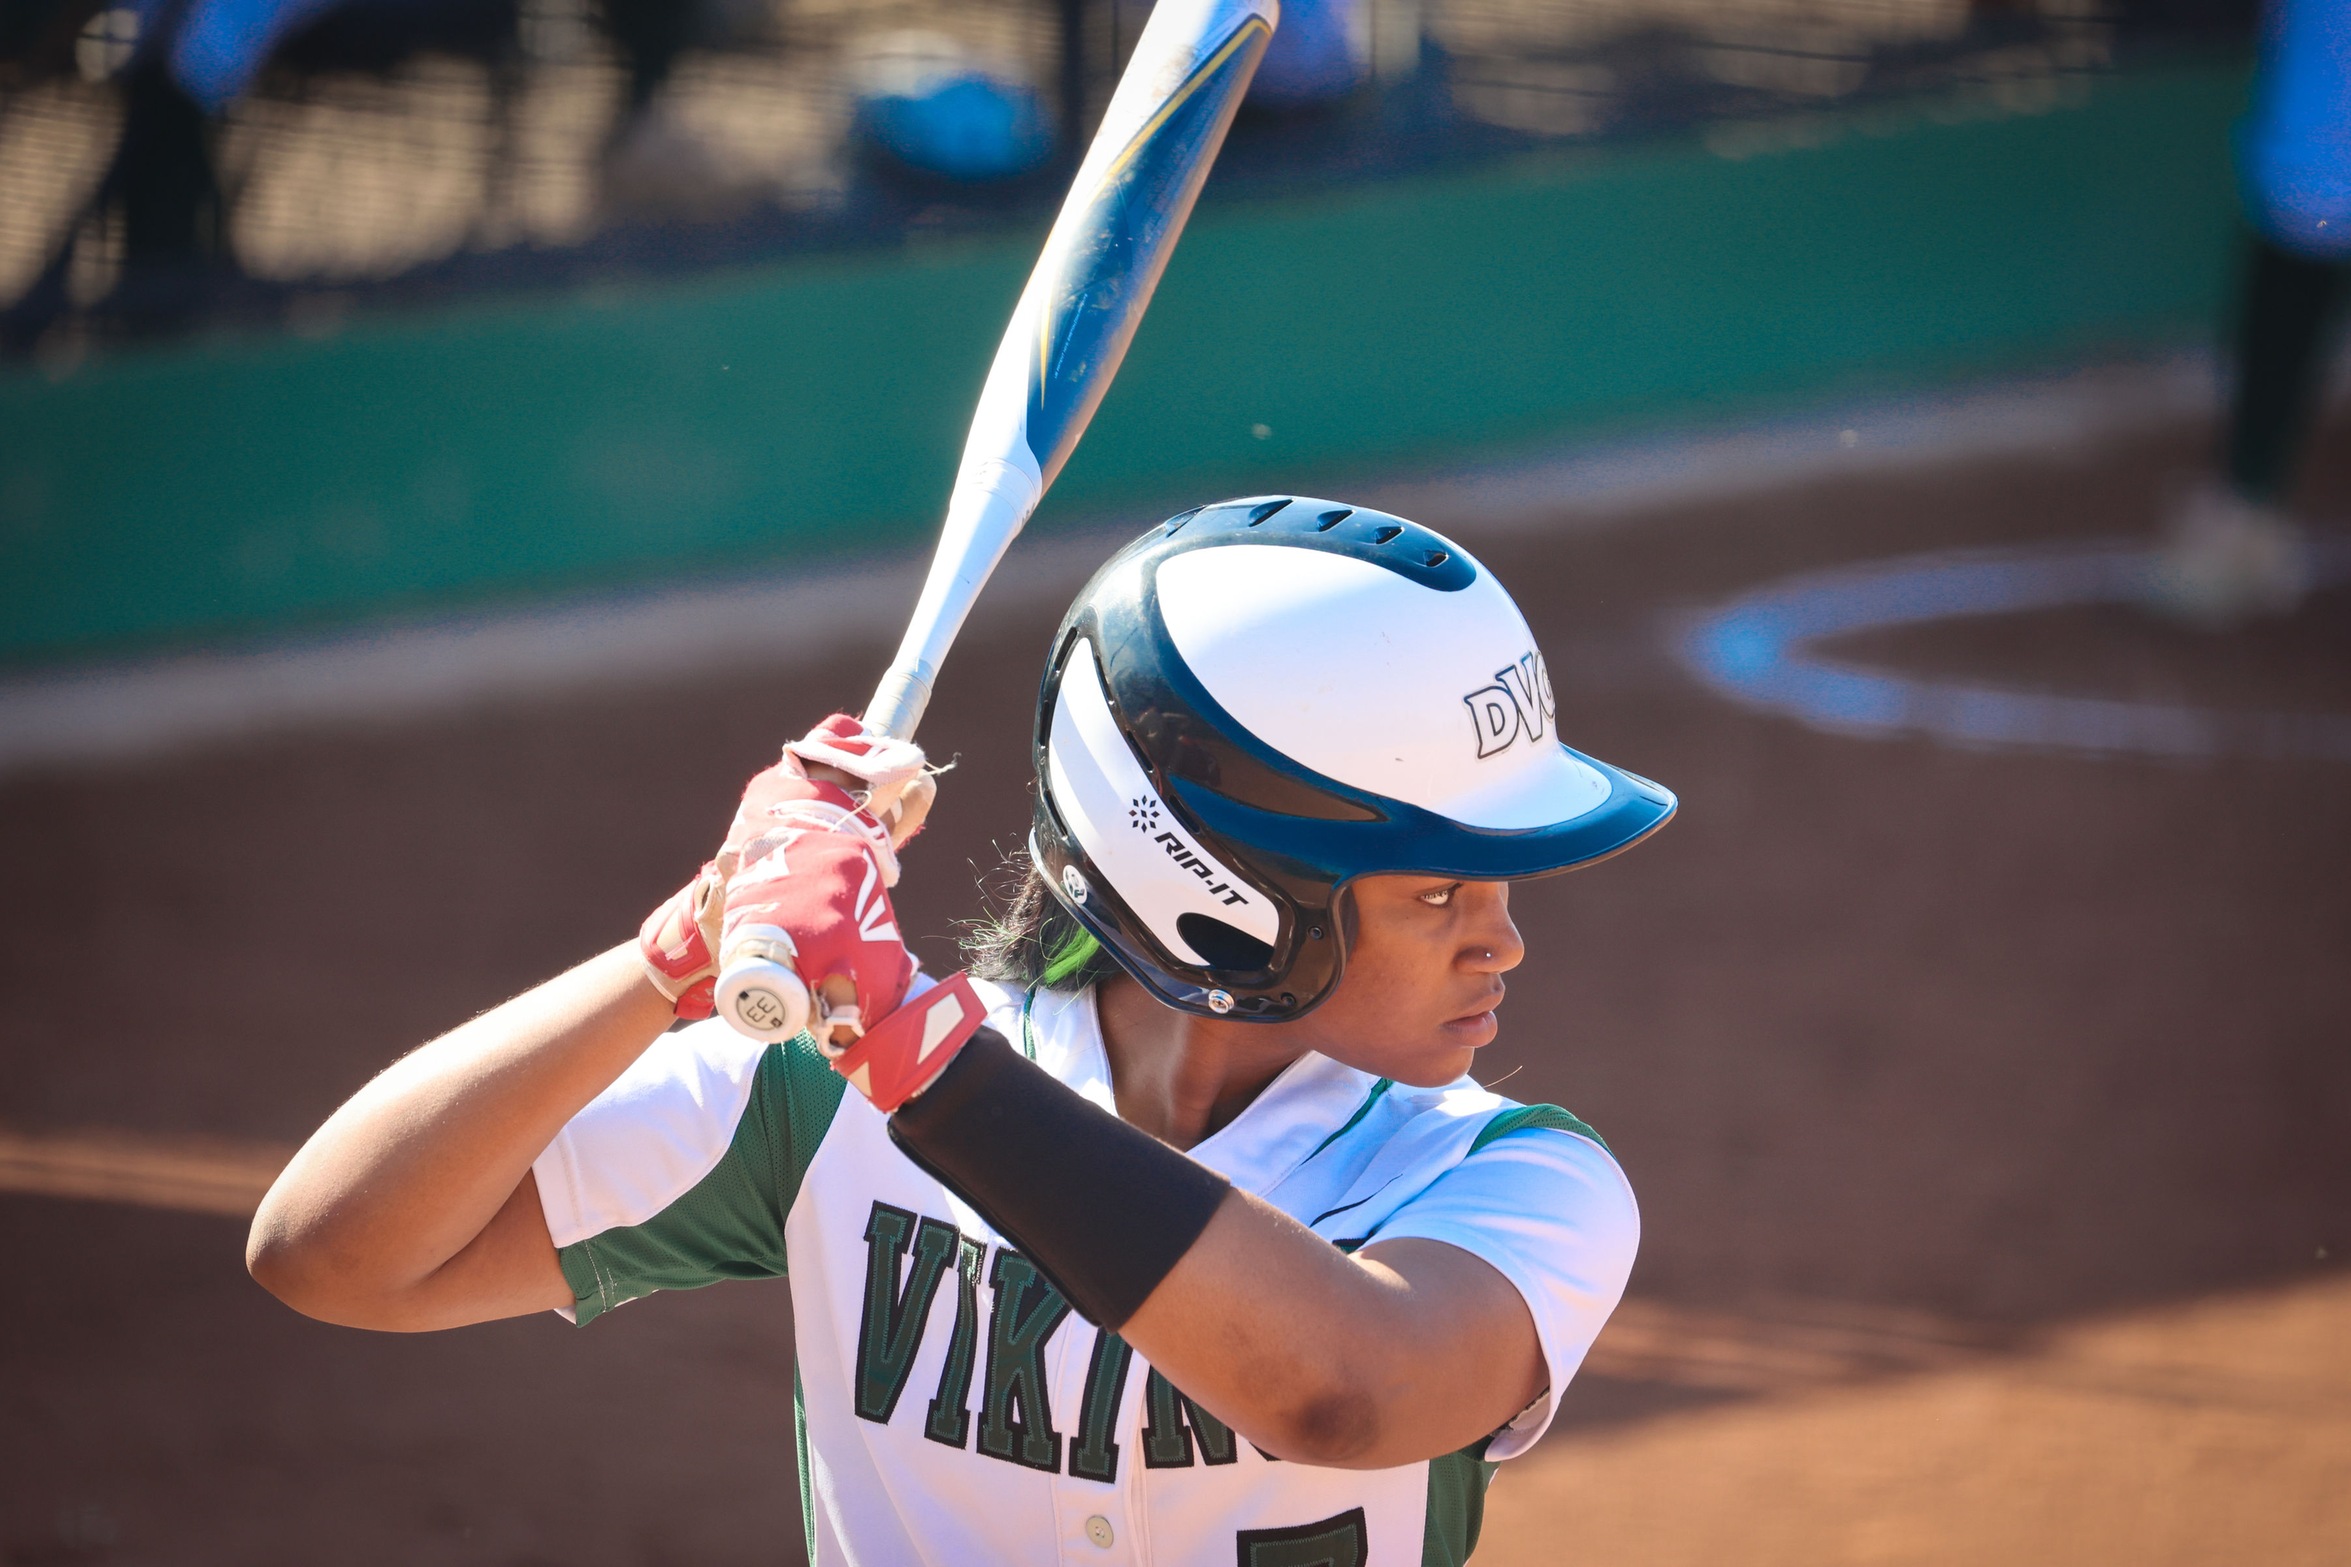 Softball bounces back with win over Sequoias after dropping 2 series in a row to CSM & San Jose